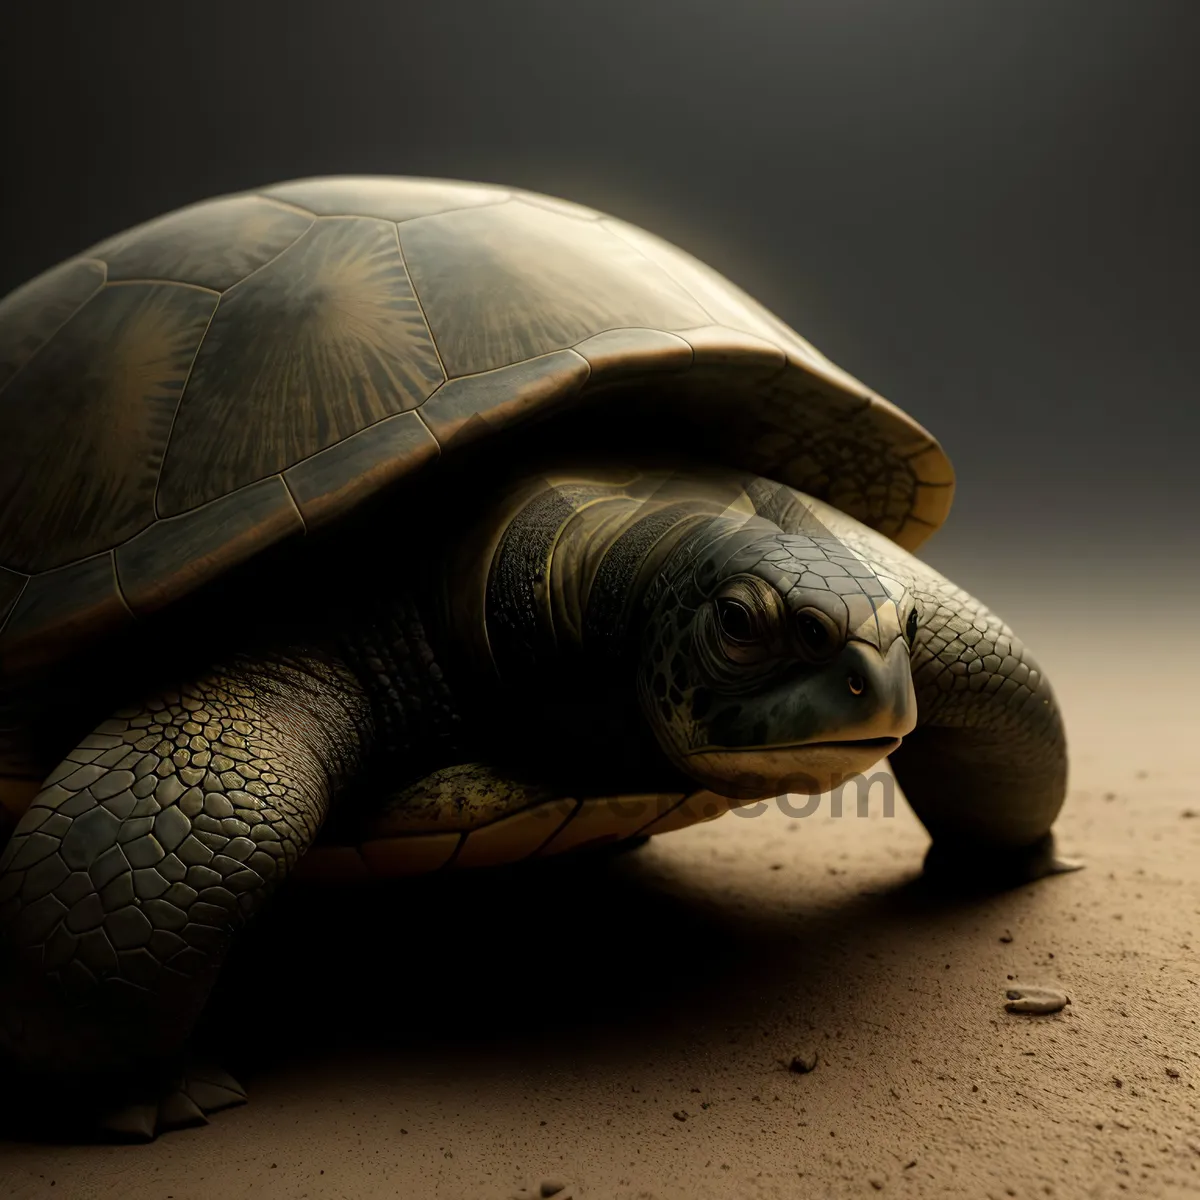 Picture of Protected Reptile in its Mud Shell: Turtle